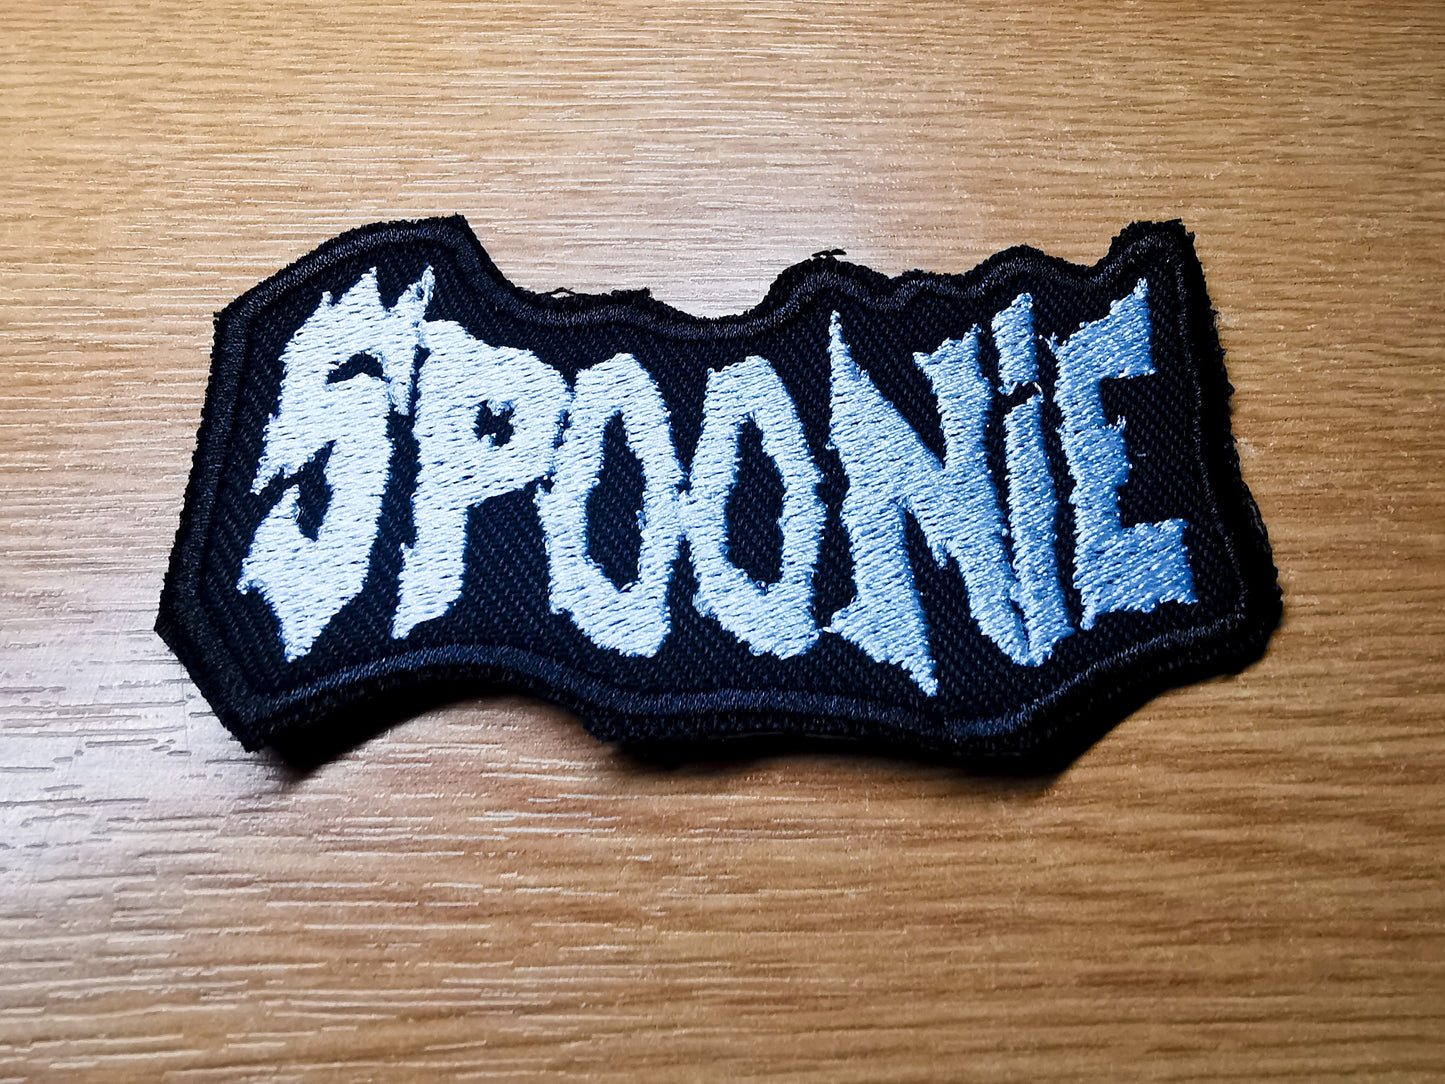 Spoonie Death Metal Iron On Embroidered Patch Spoon Theory Invisible Disability EDS or Fibromyalgia Autism Black Metal